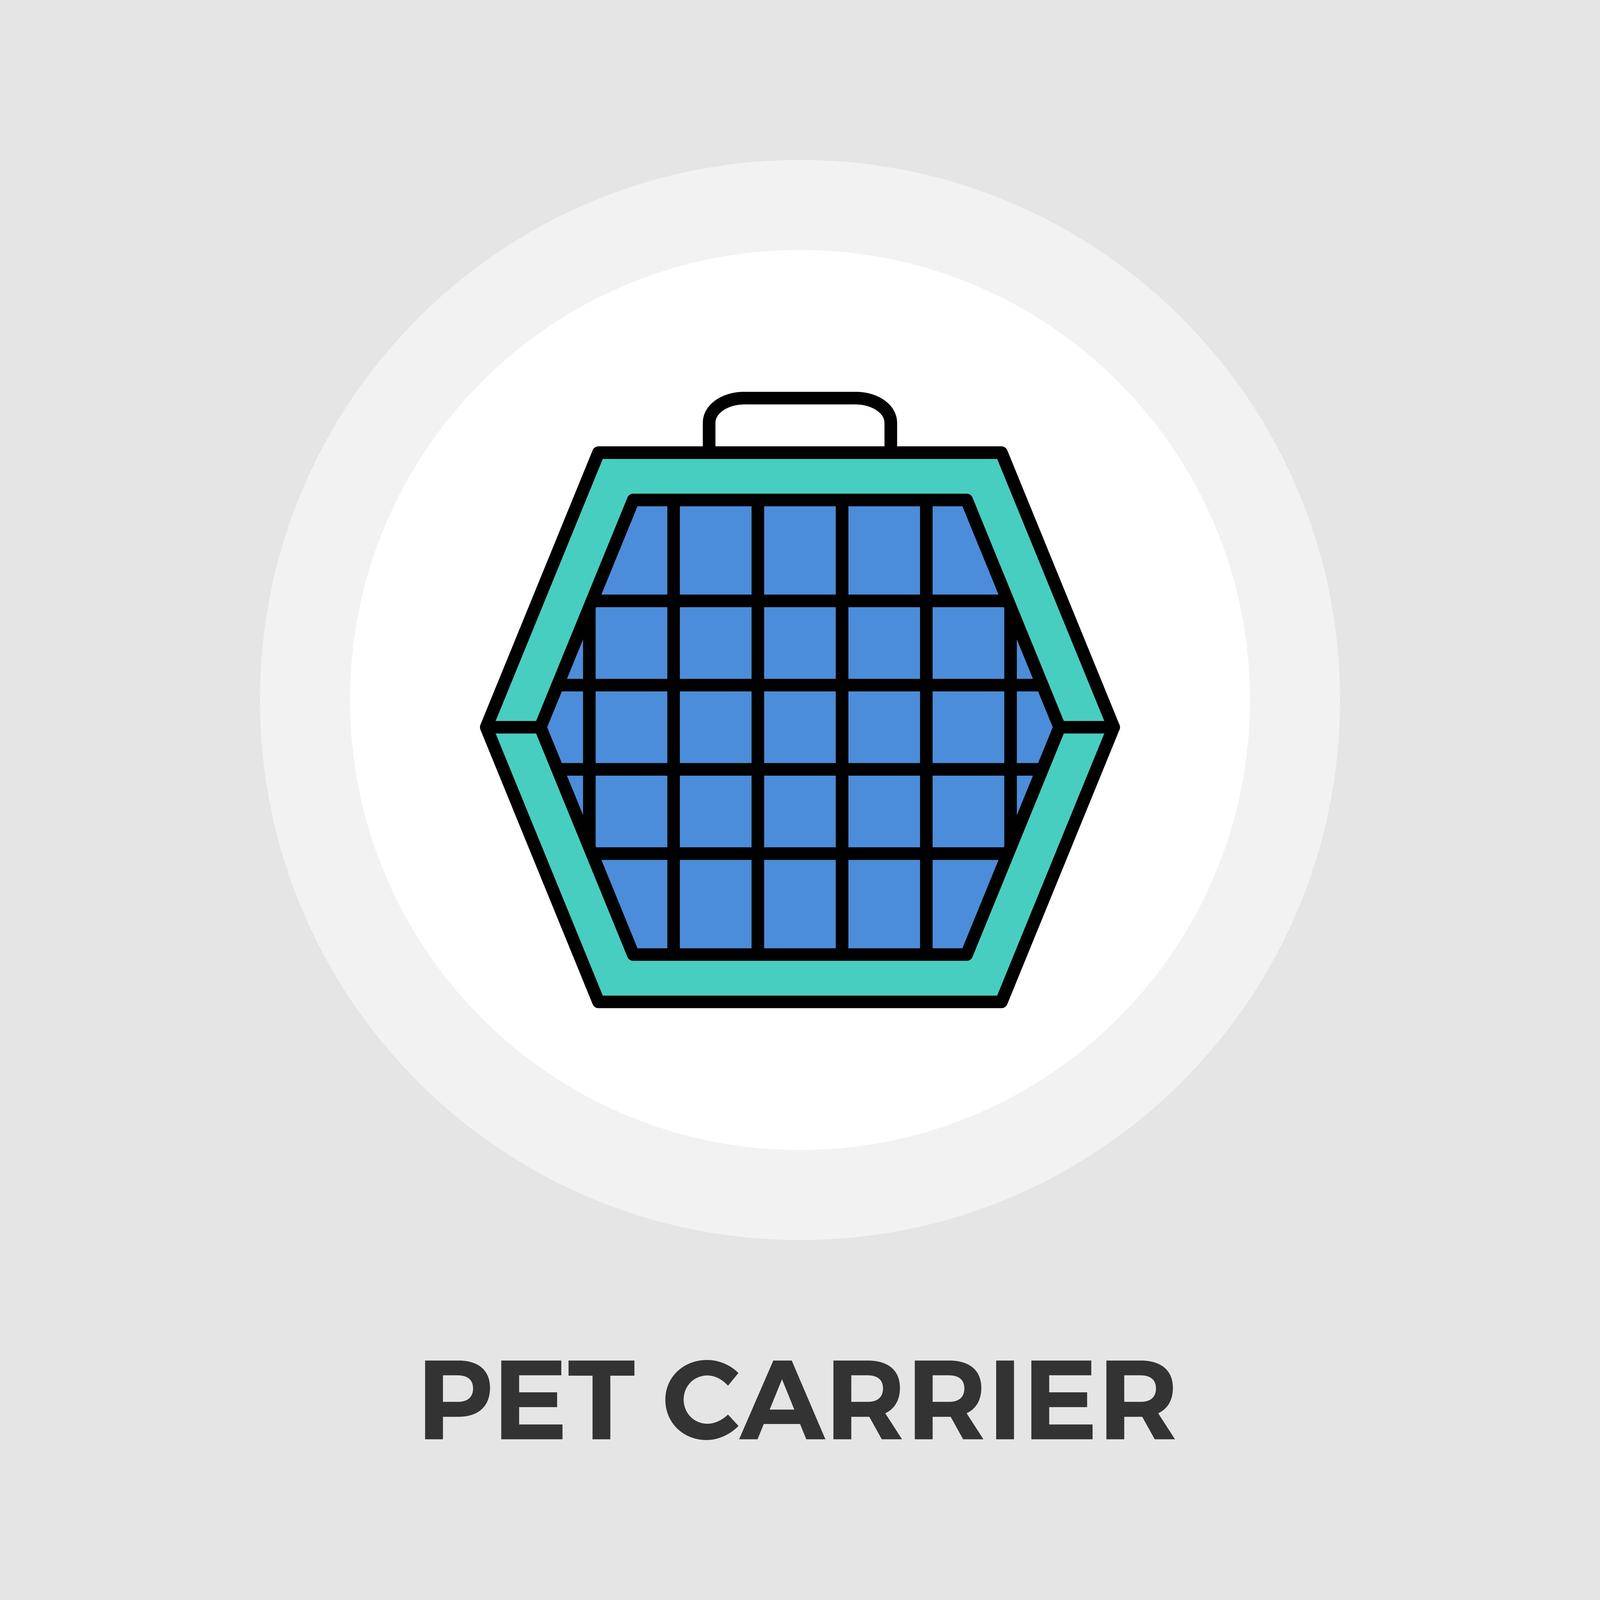 Pet Carrier Icon Vector. Flat icon isolated on the white background. Editable EPS file. Vector illustration.